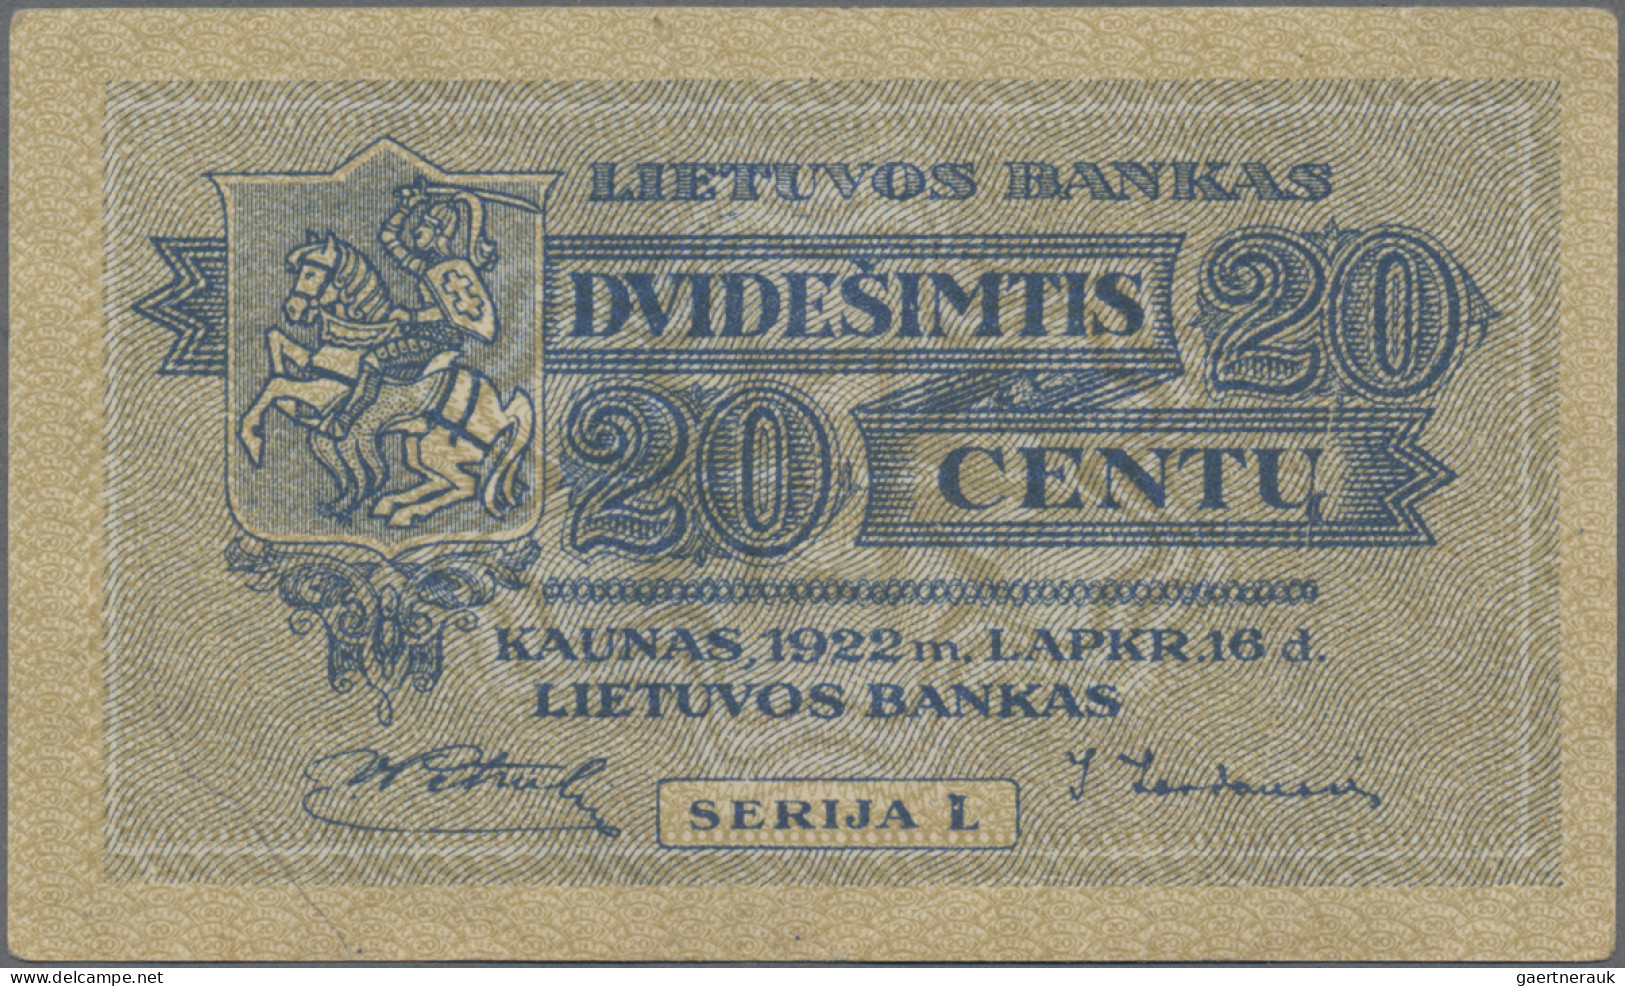 Lithuania: Lietuvos Bankas, set with 4 banknotes, series 1922, with 1 Centas (P.